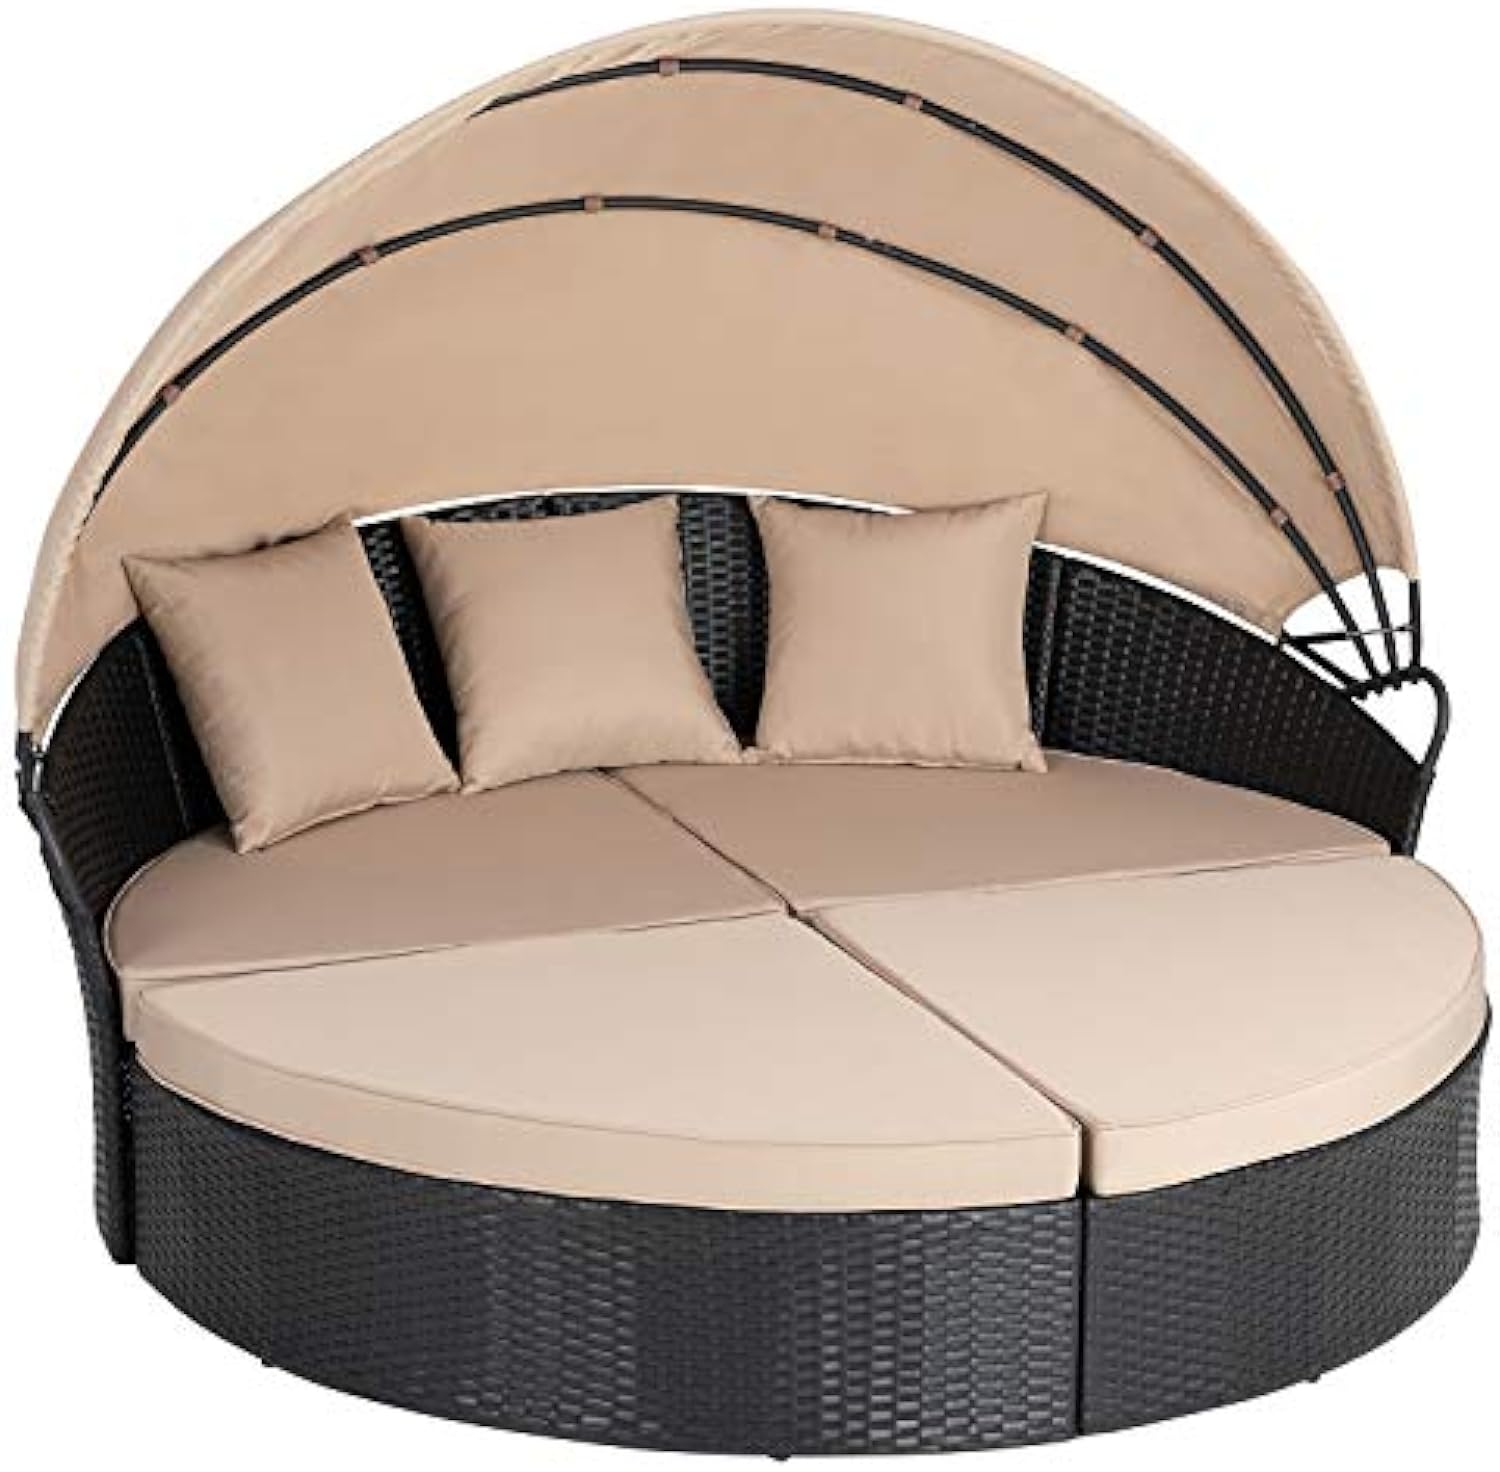 Luxury Outdoor Patio Furniture Outdoor Round Daybed with Retractable Canopy